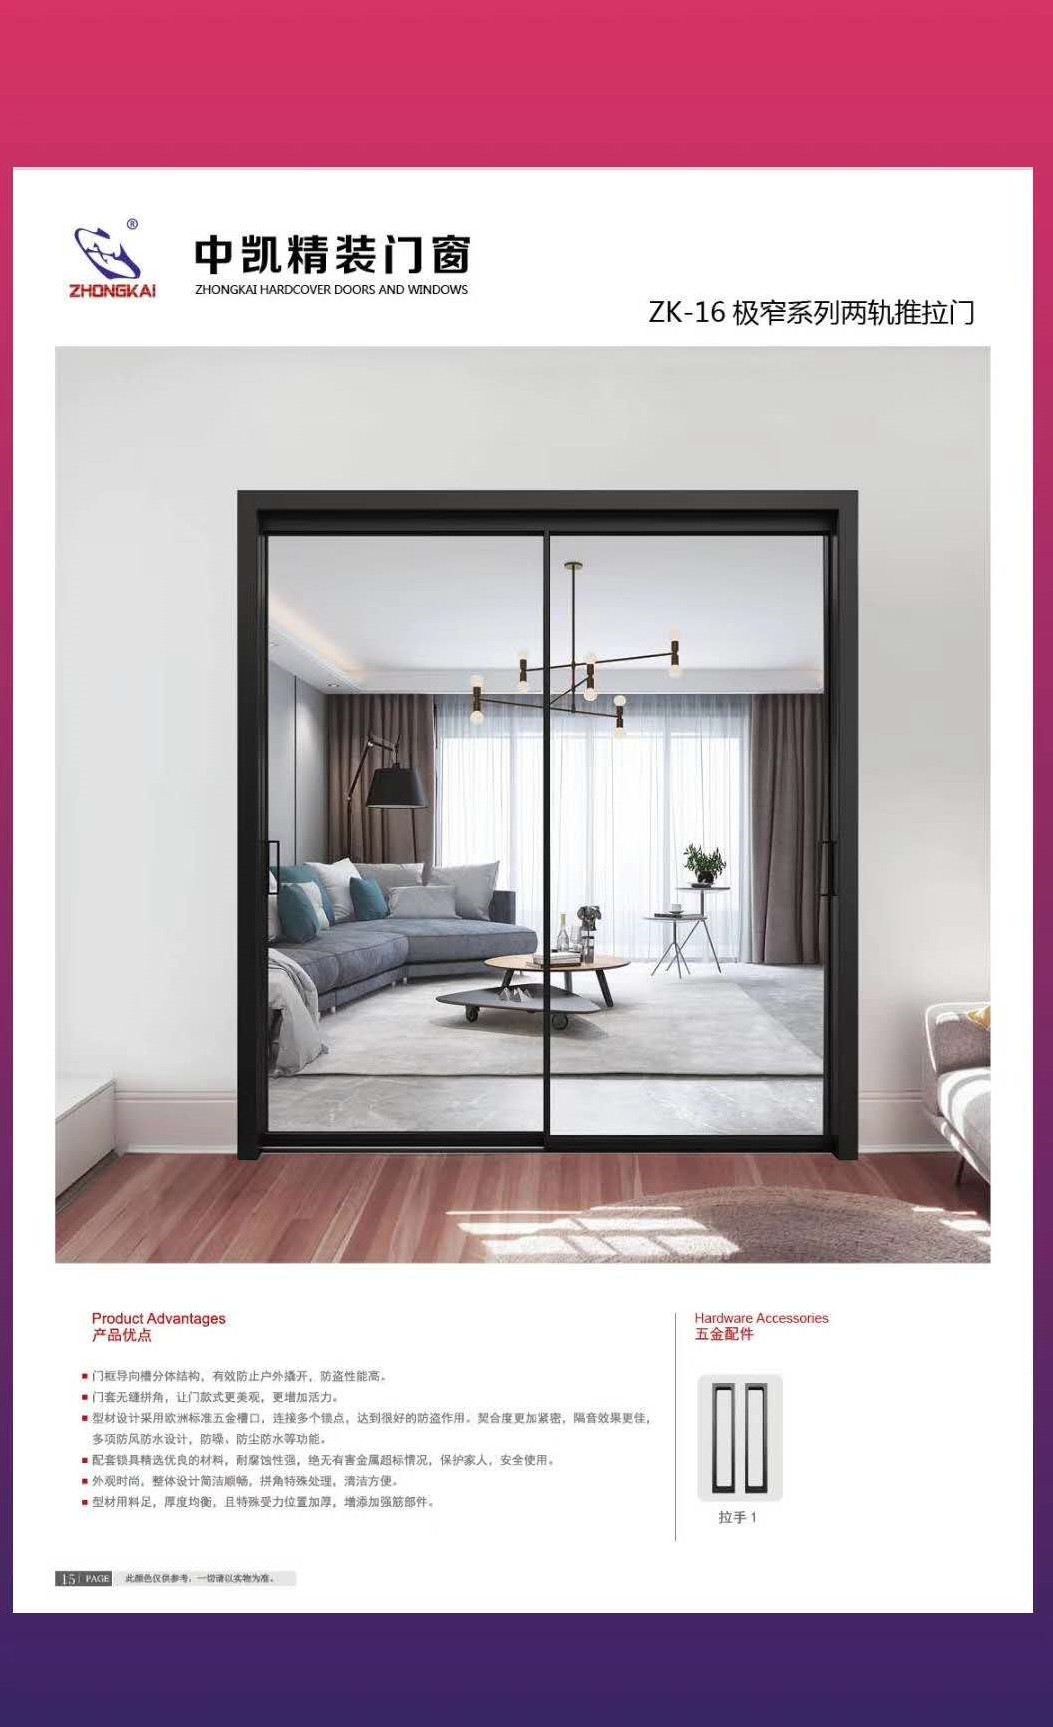 ZK-16 extremely narrow series two-rail sliding doors